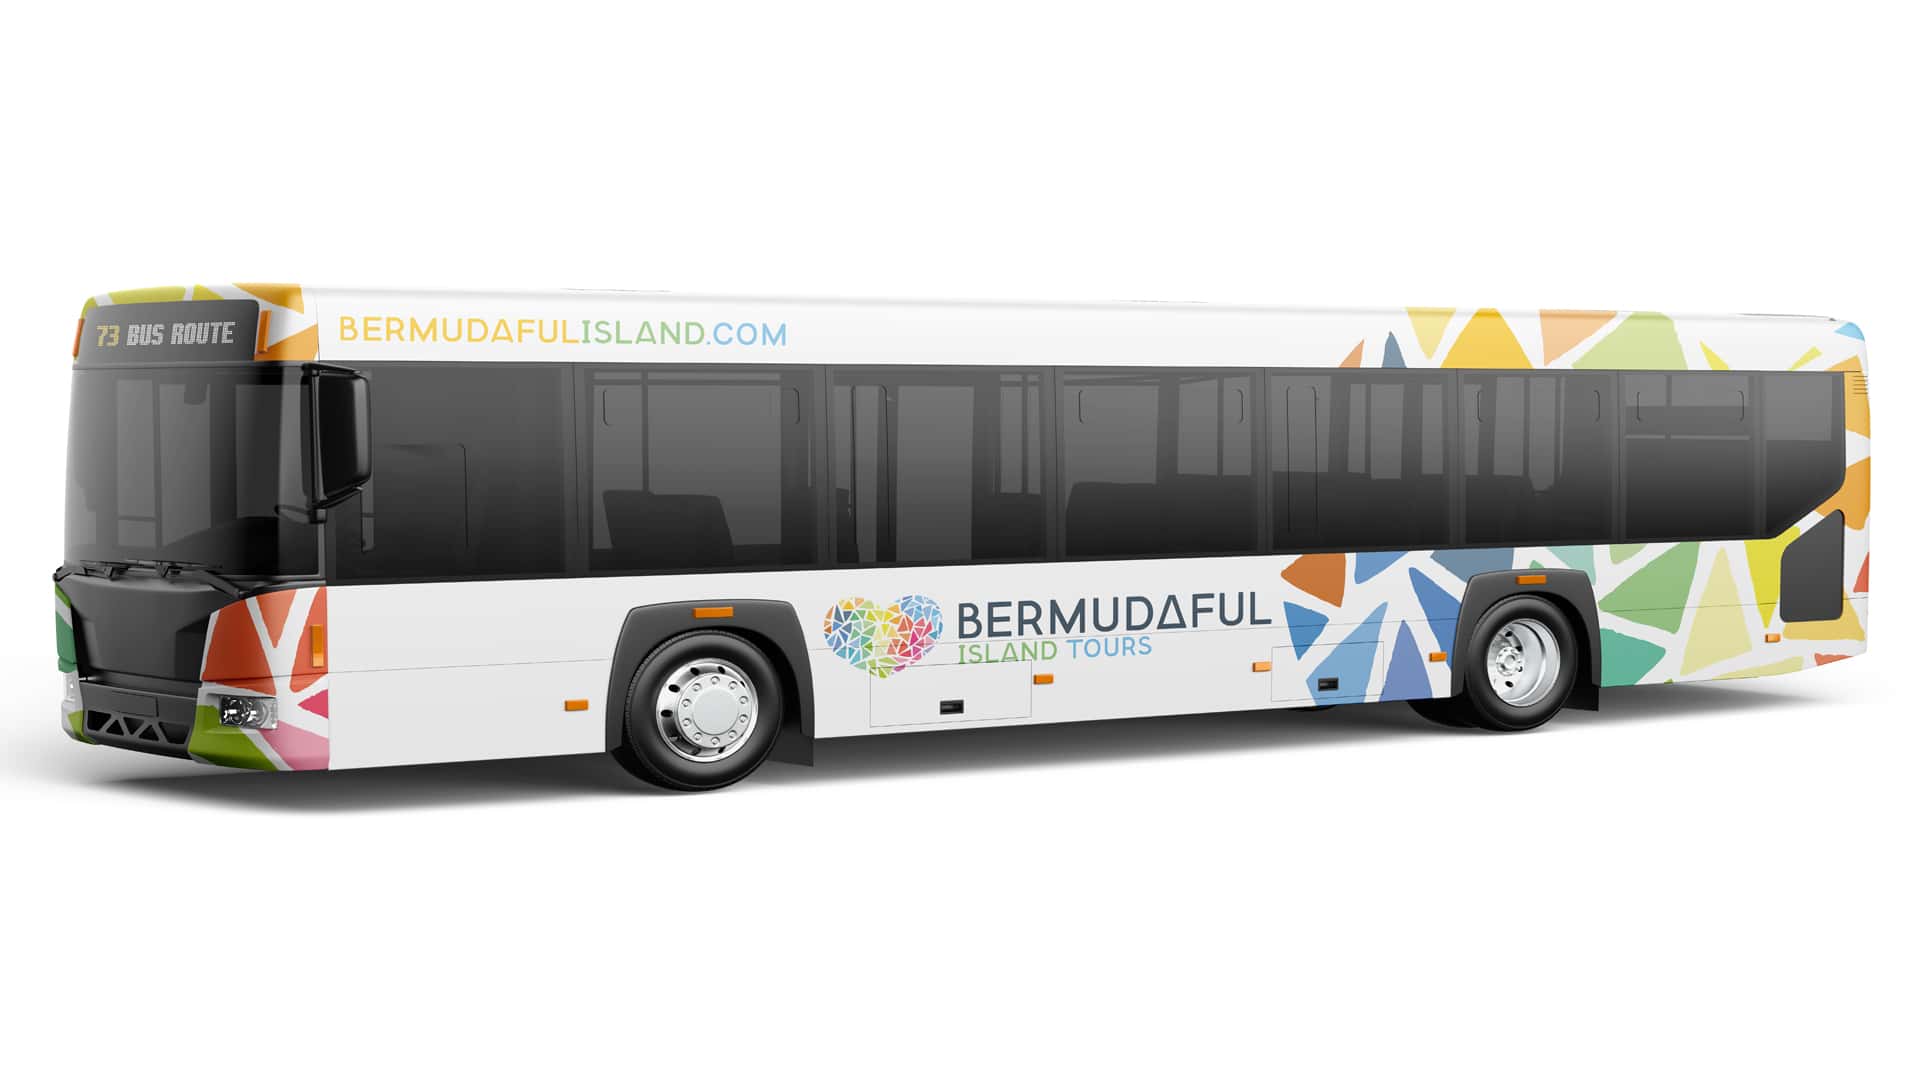 A white bus with a colorful design on it, offering Tours and Activities.